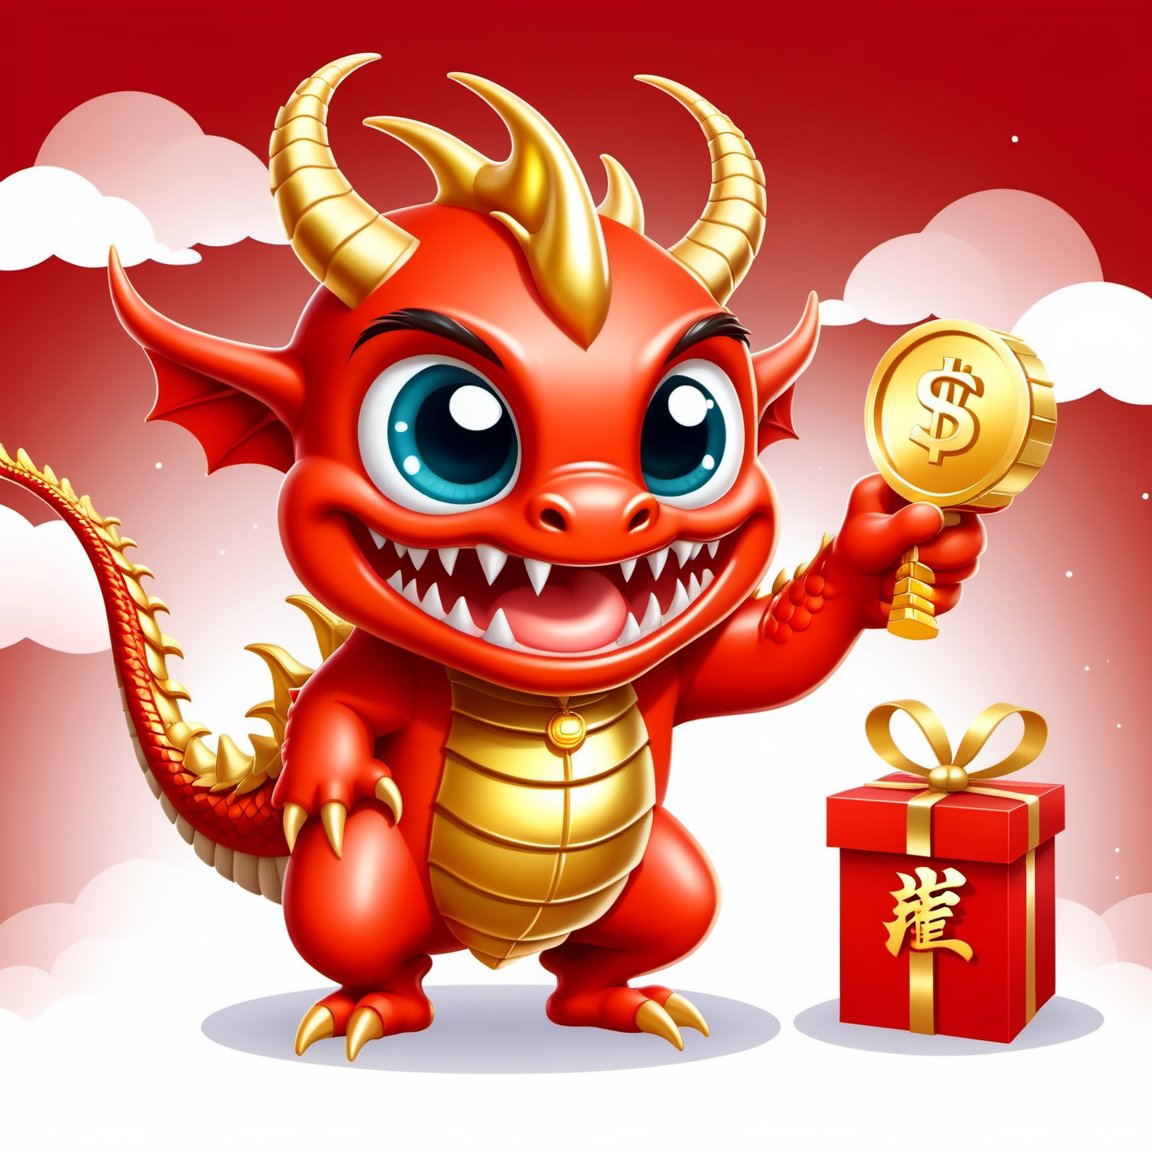 Cartoon Dragon,  illustration,  2D effect,  Chinese style,  New Year mascot,  Holding money in left hand,  Holding gold bar in right hand,  big eyes,  smile,  Dragon horn on head,<lora:EMS-90475-EMS:0.500000>,<lora:EMS-52717-EMS:0.400000>